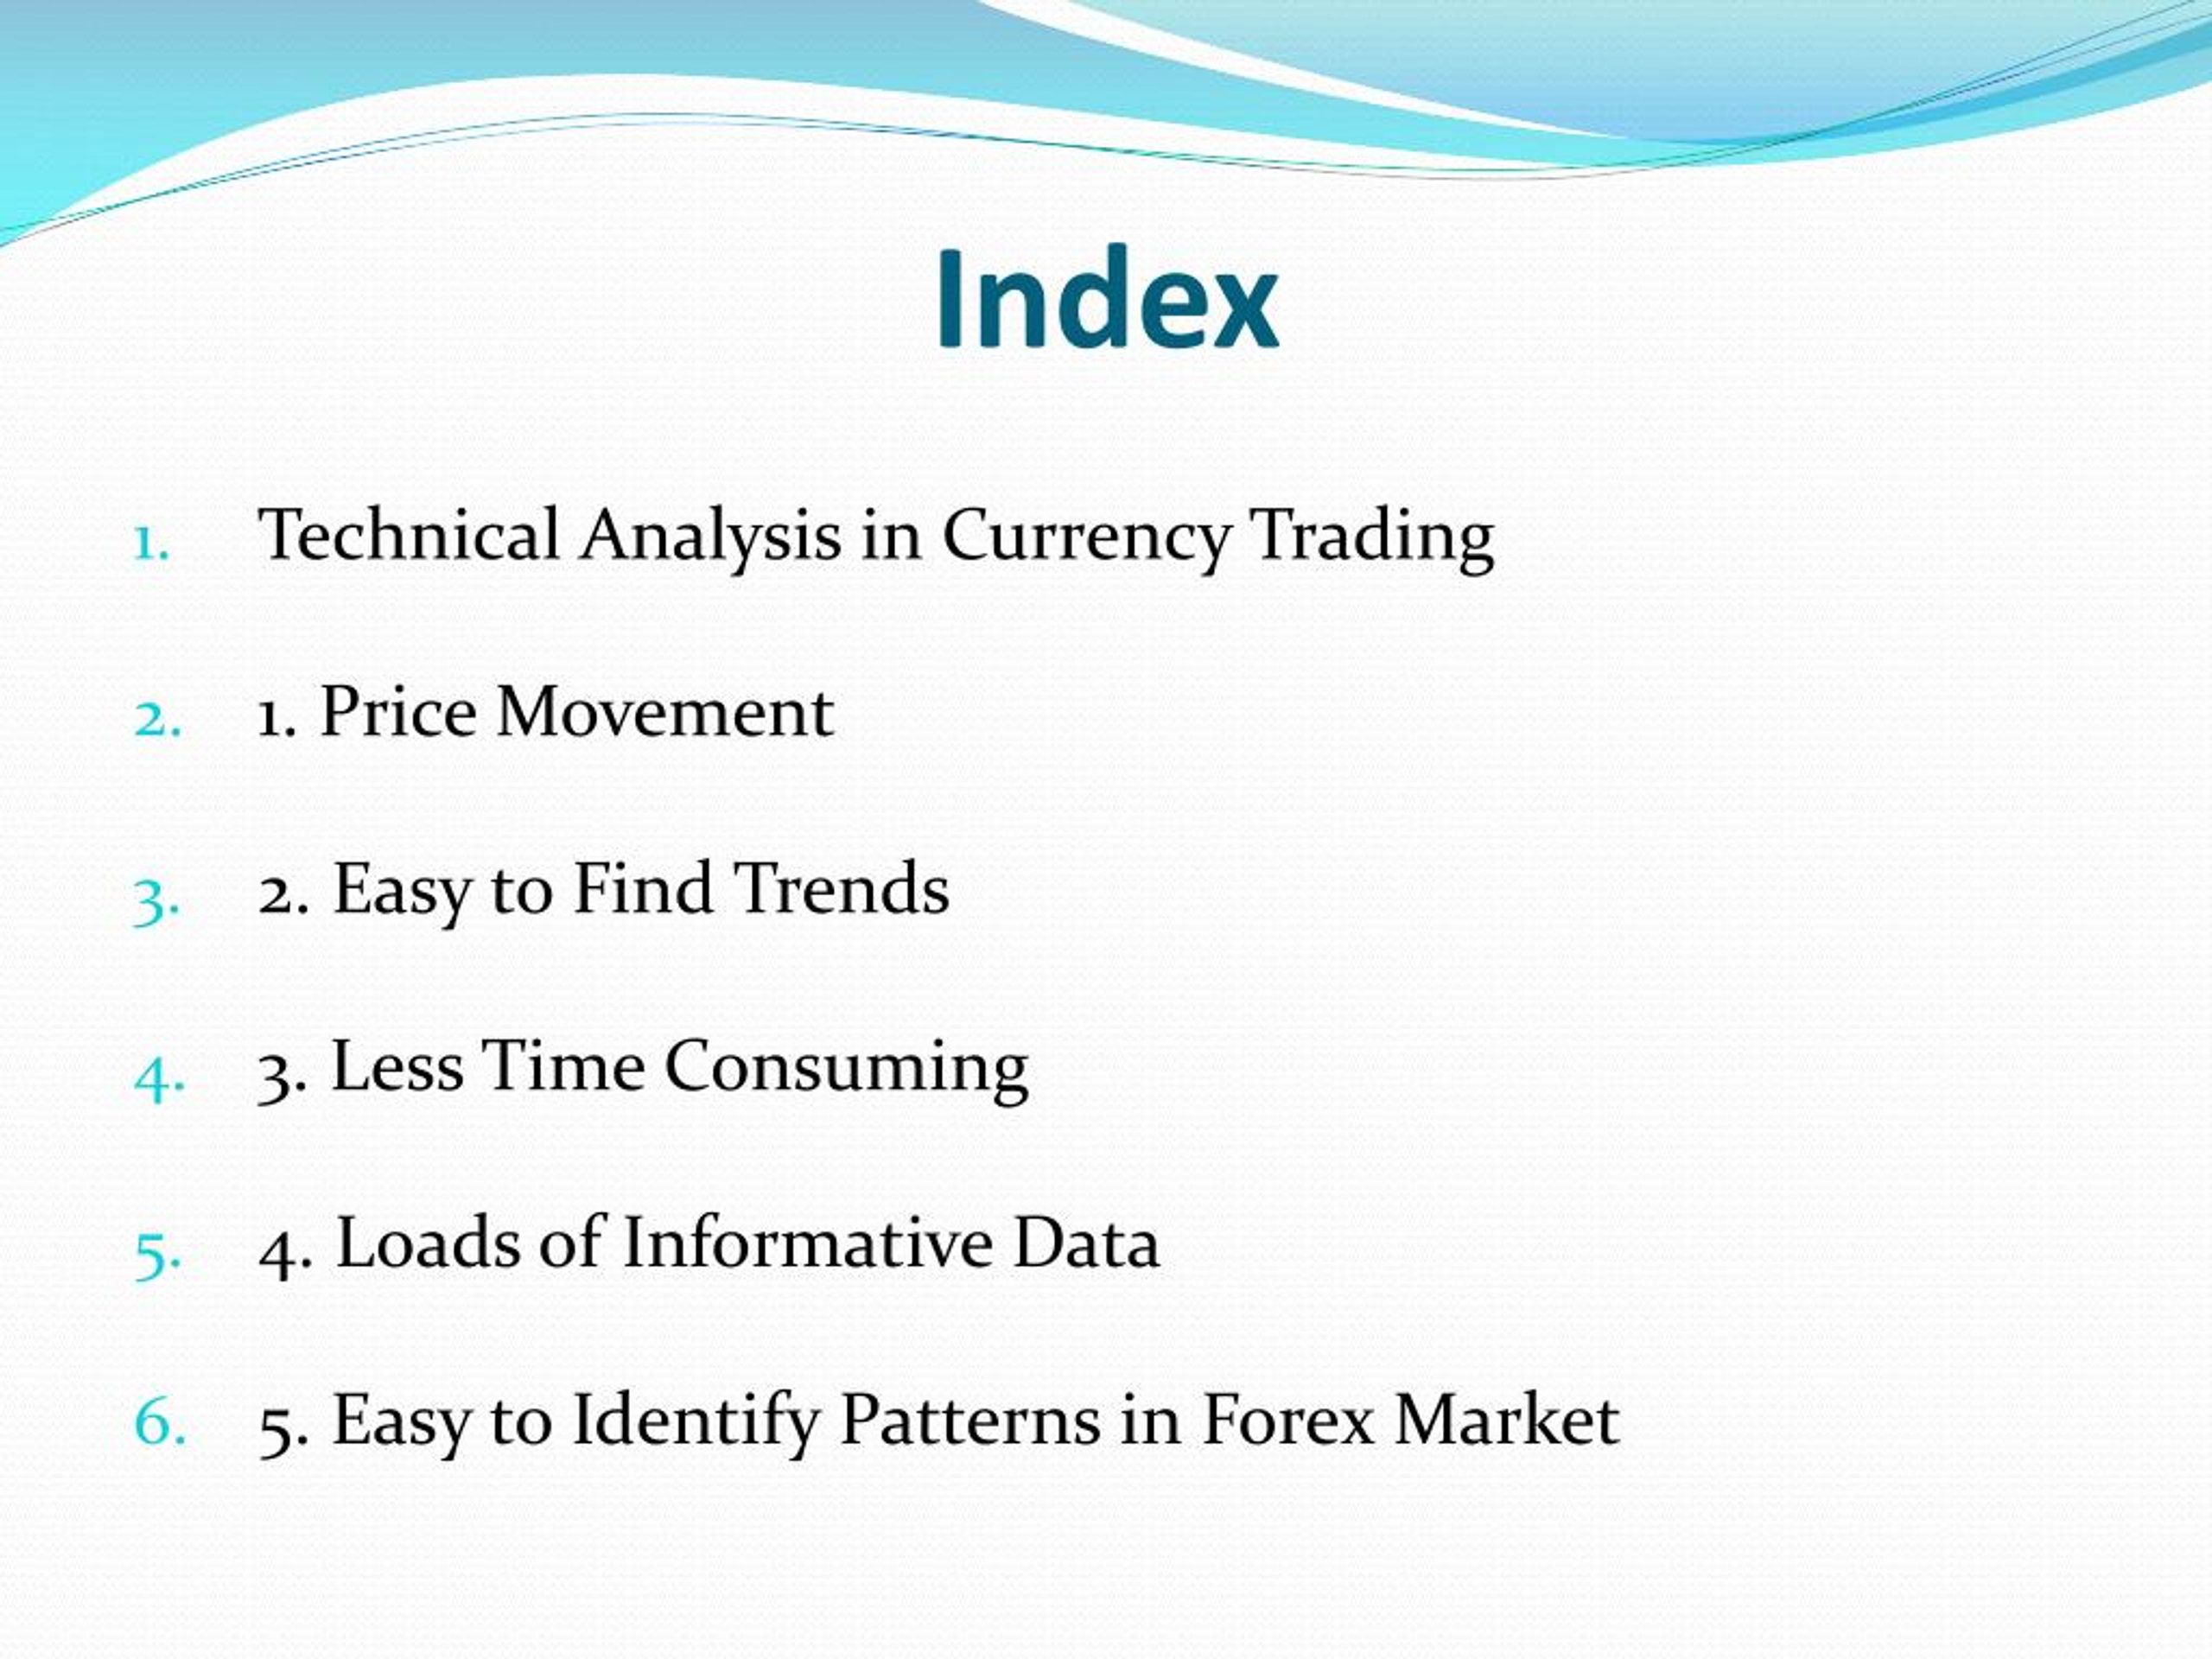 Ppt 5 Benefits Of Technical Analysis In Currency Trading - 